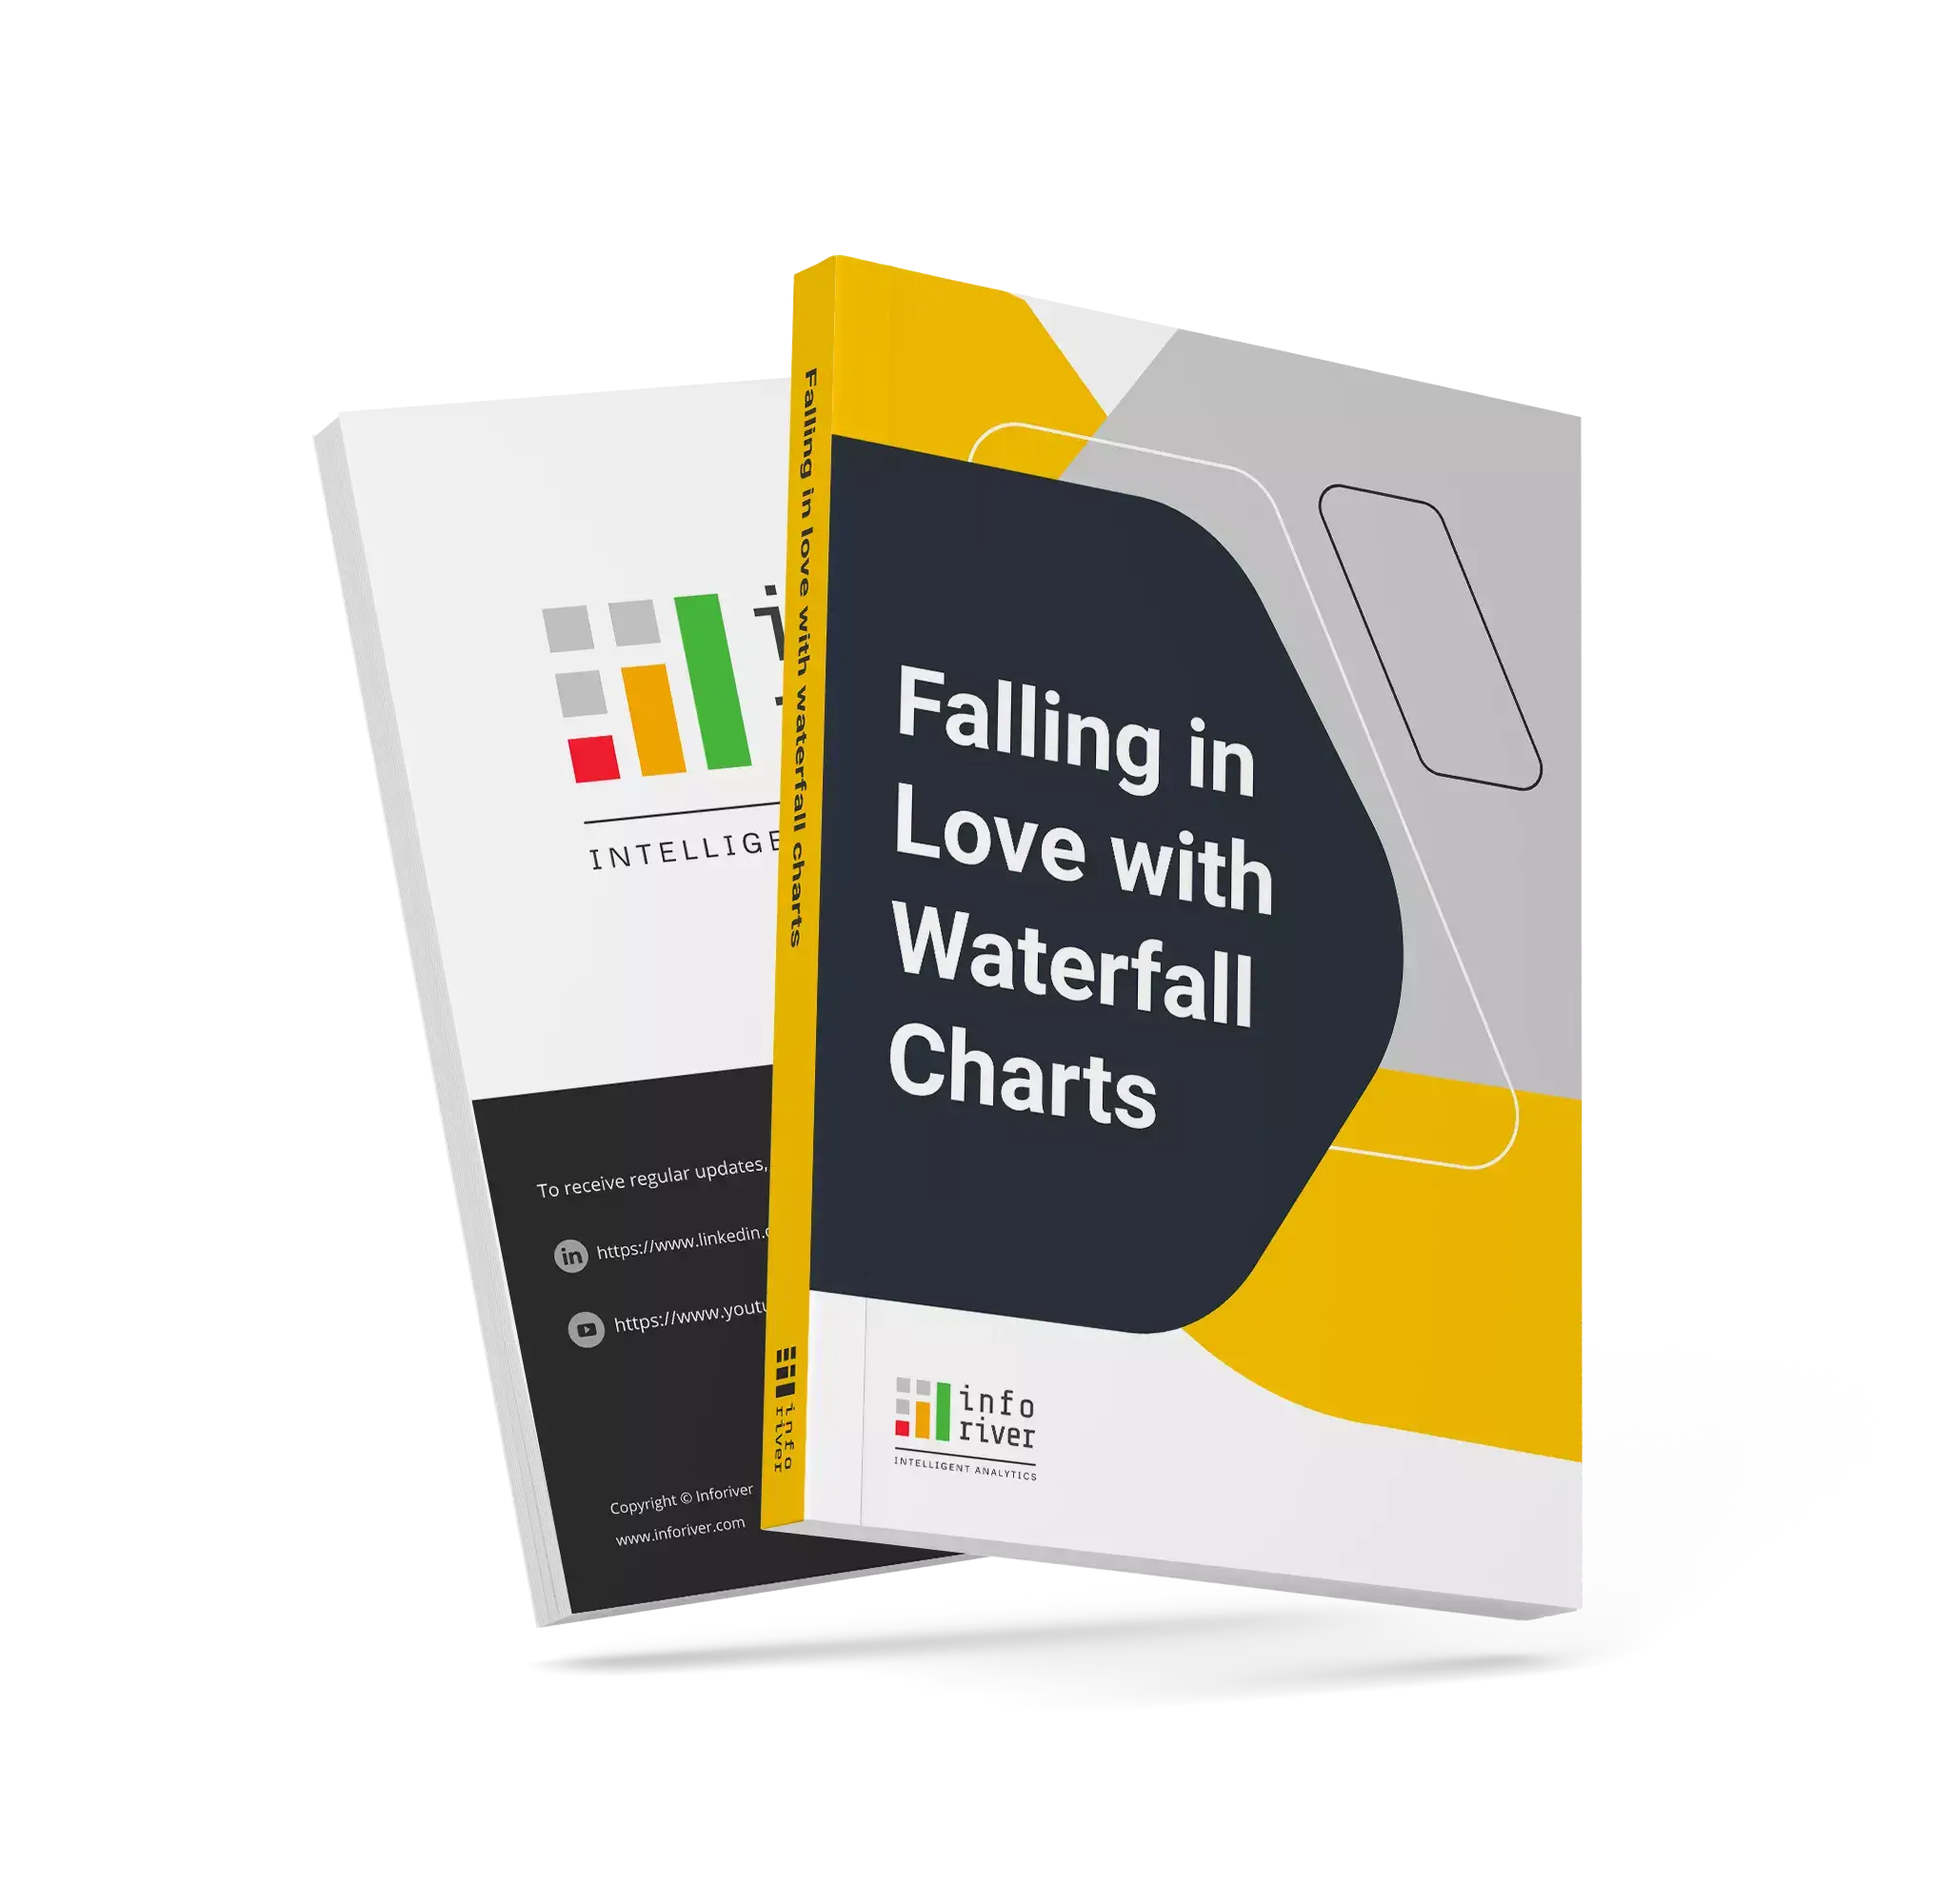 Falling in love with waterfall charts ebook cover